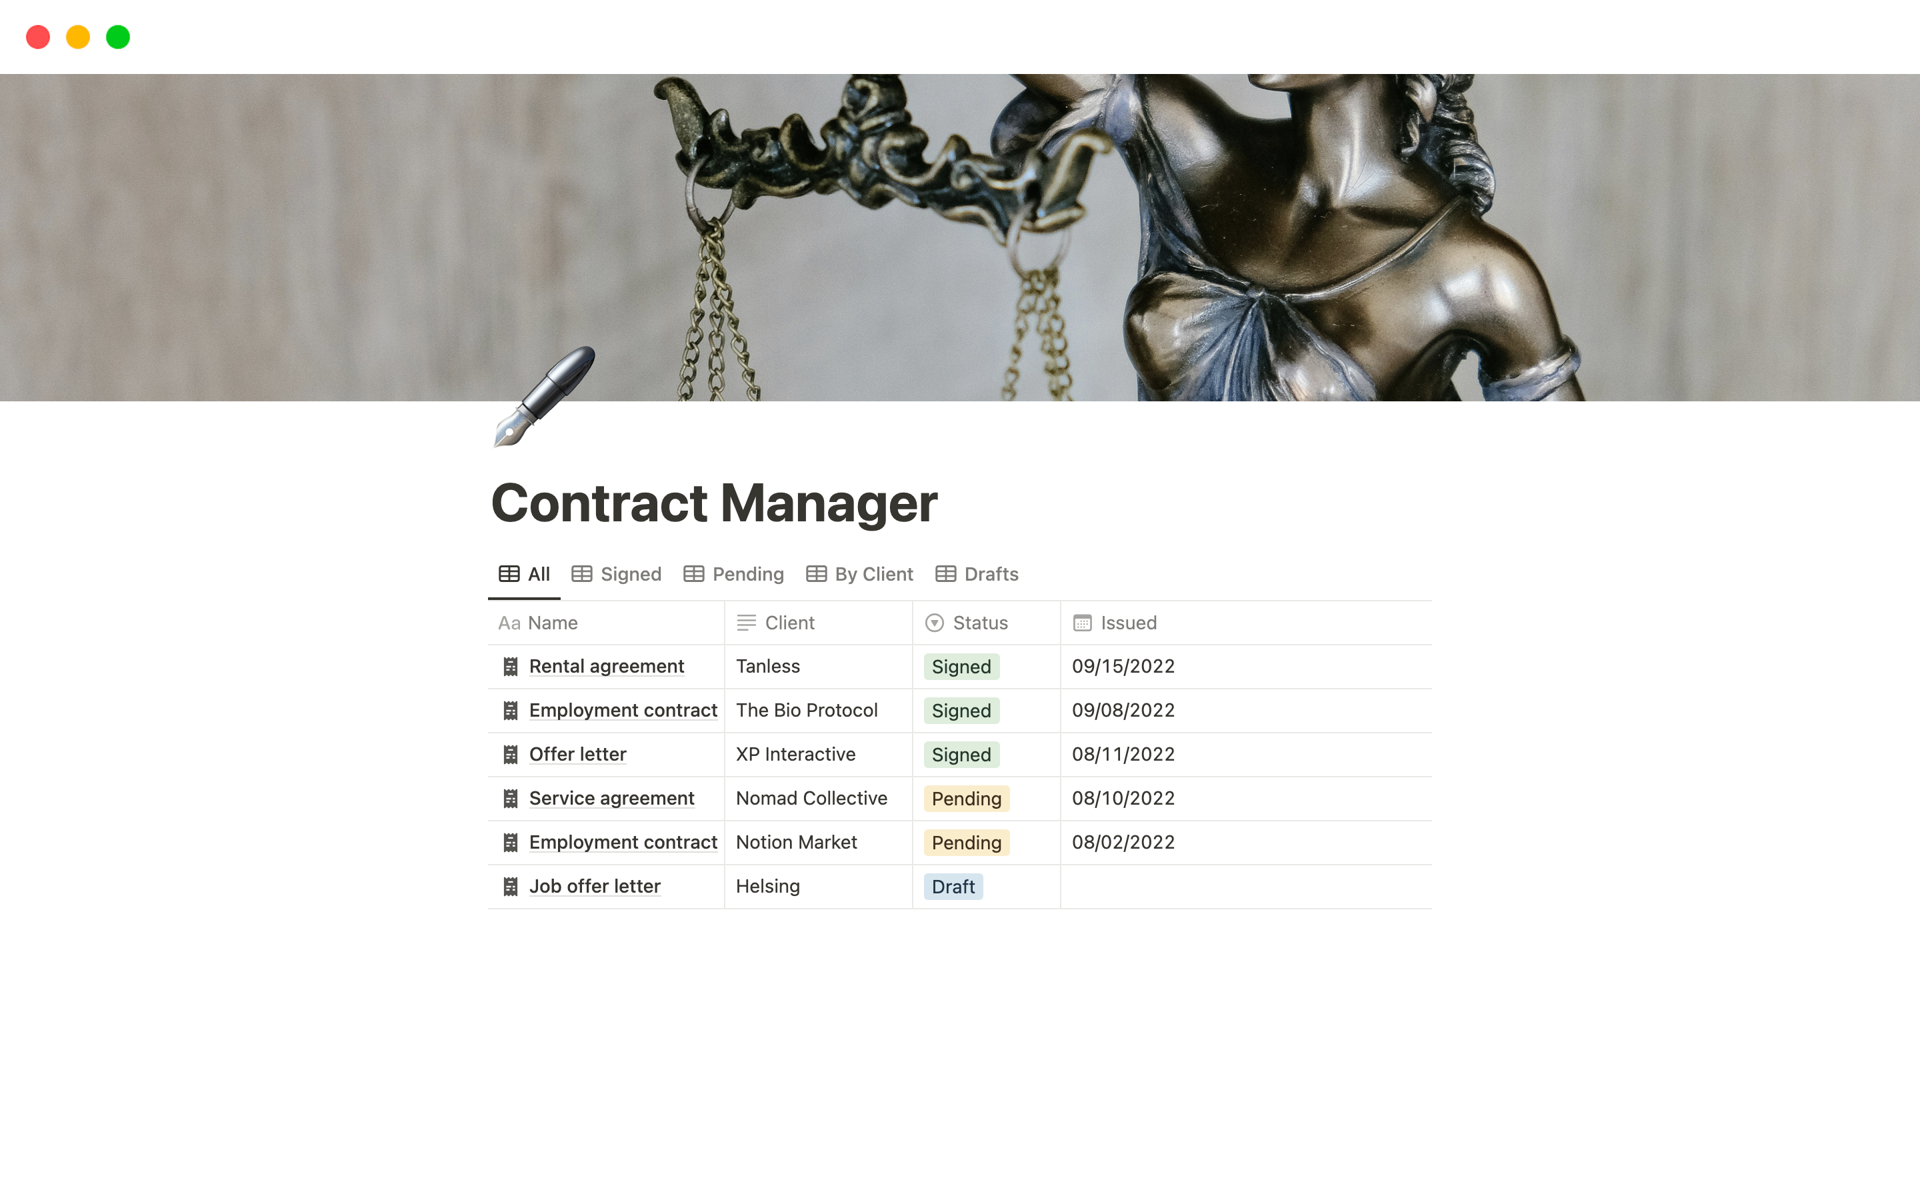 A simple contract management system for creative freelancers